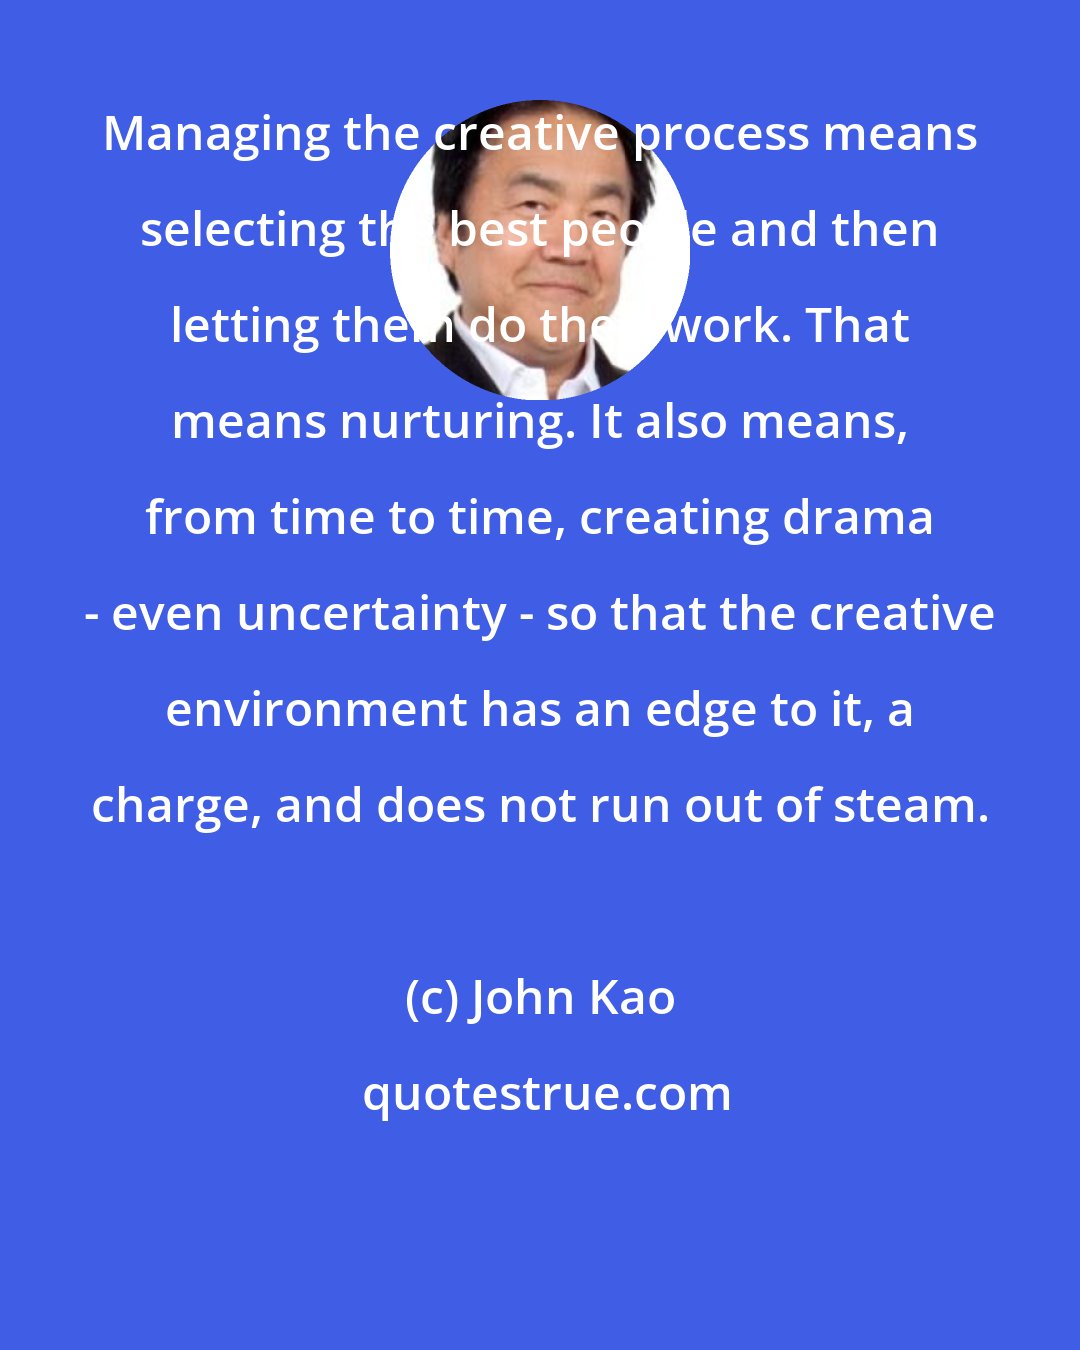 John Kao: Managing the creative process means selecting the best people and then letting them do their work. That means nurturing. It also means, from time to time, creating drama - even uncertainty - so that the creative environment has an edge to it, a charge, and does not run out of steam.